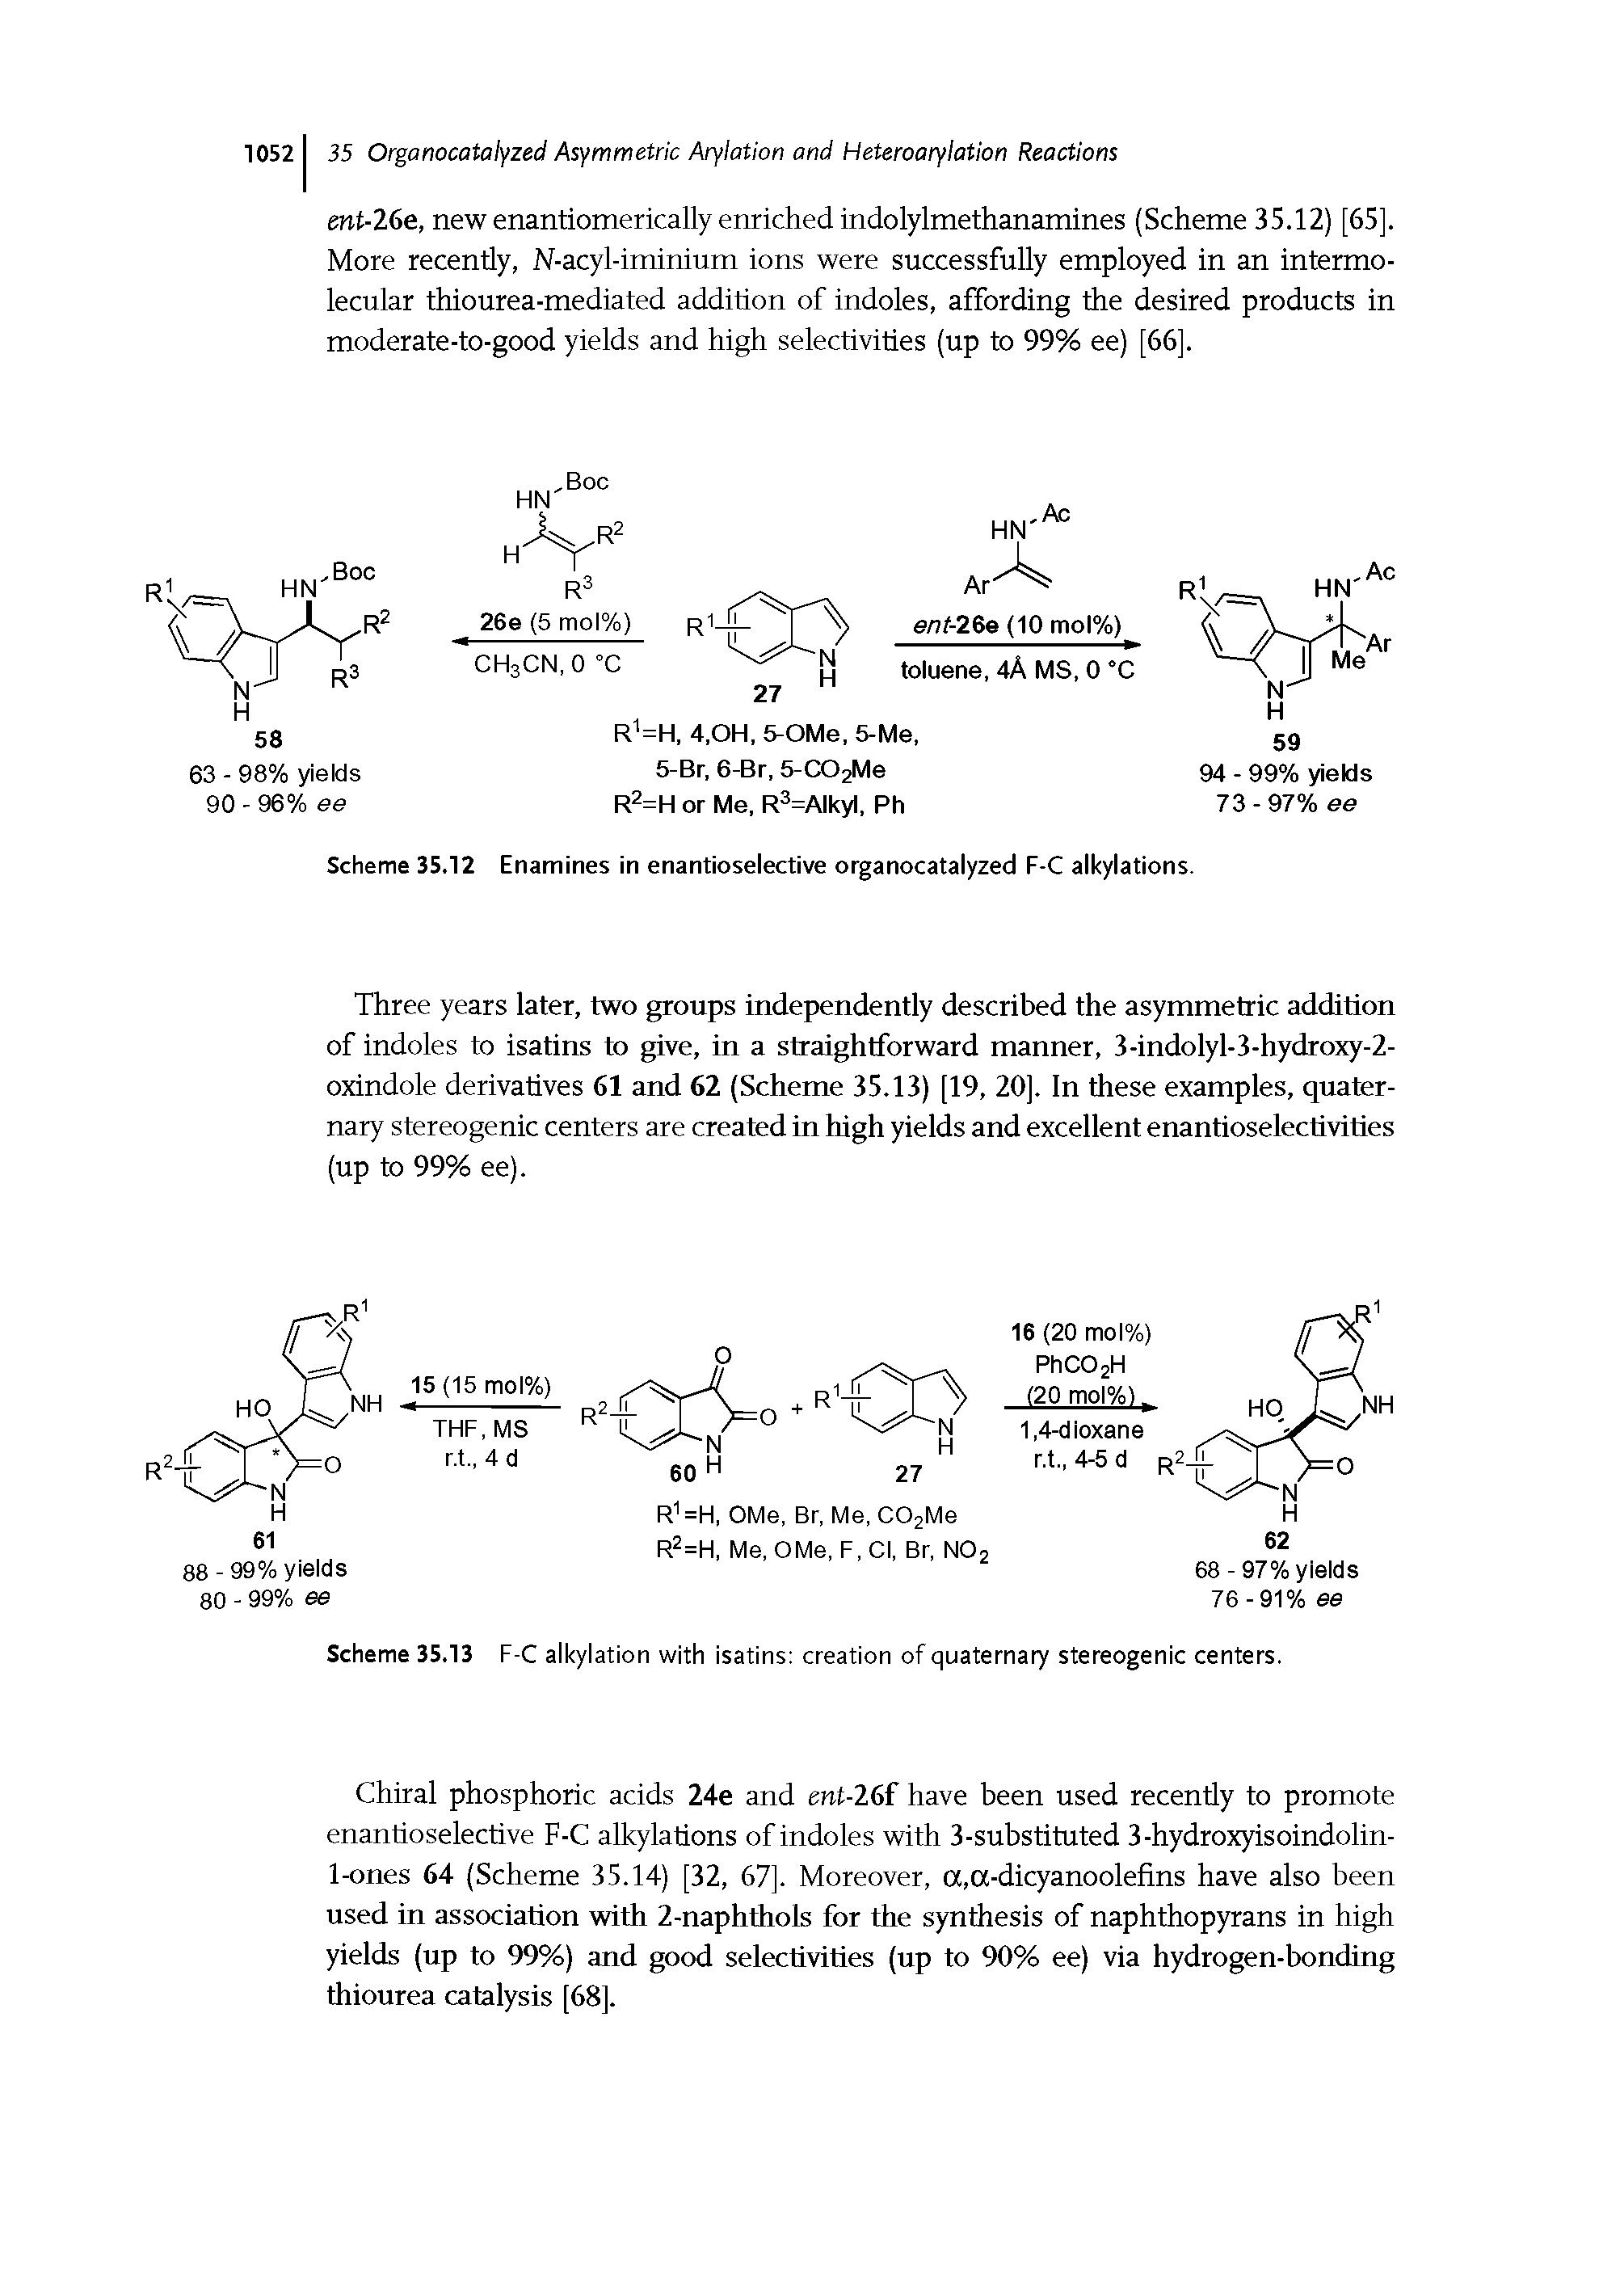 Scheme 35.13 F-C alkylation with isatins creation of quaternary stereogenic centers.